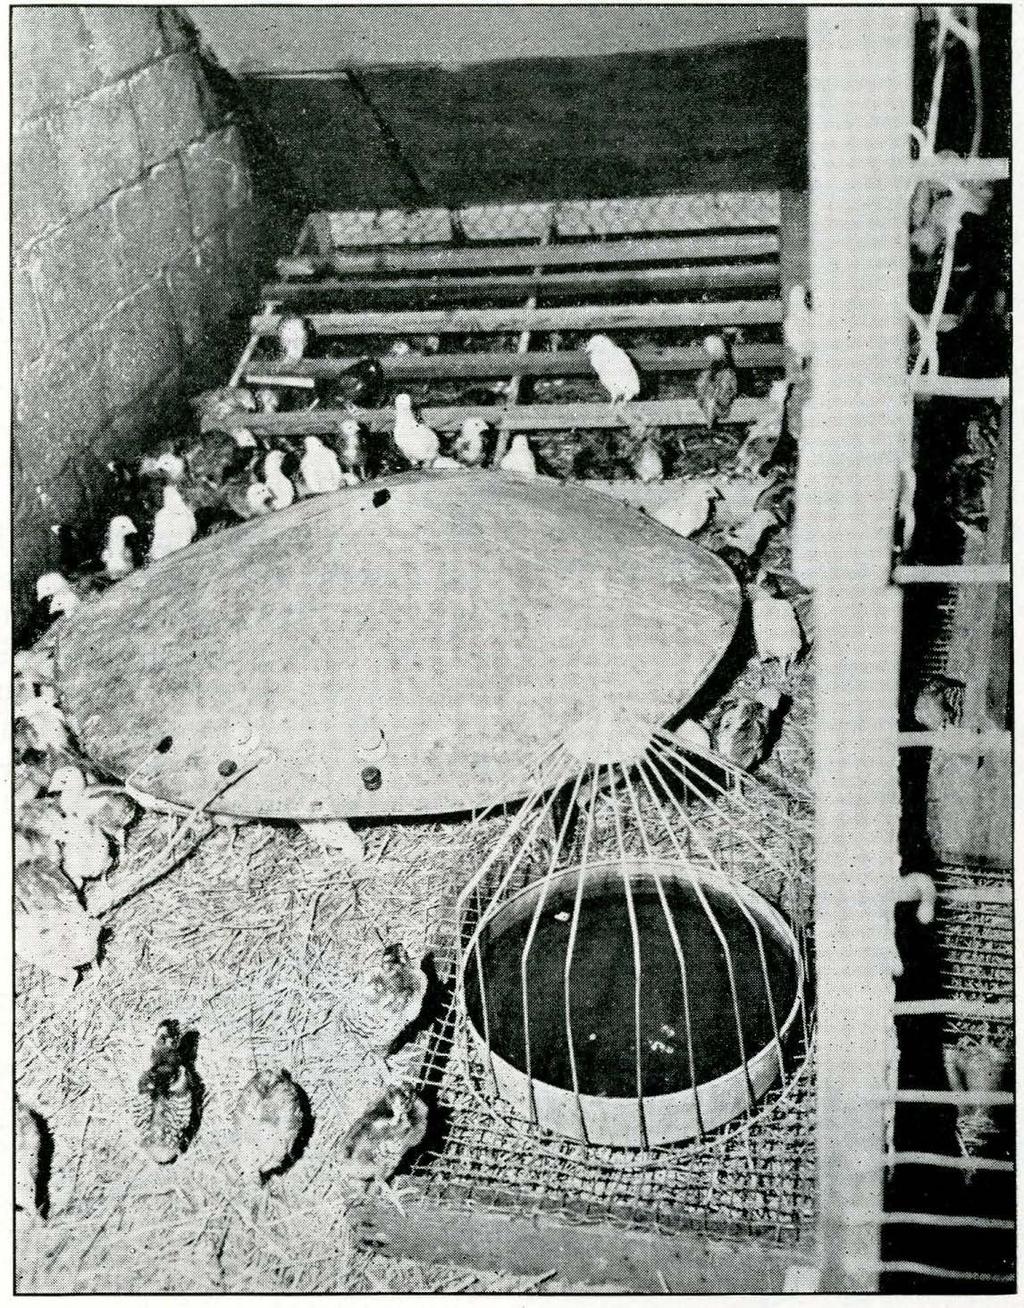 10 Extension Circular 400 Encourage Early Roosting As a rule, chicks get better ventilation and grow and develop more rapidly when they begin roosting early.